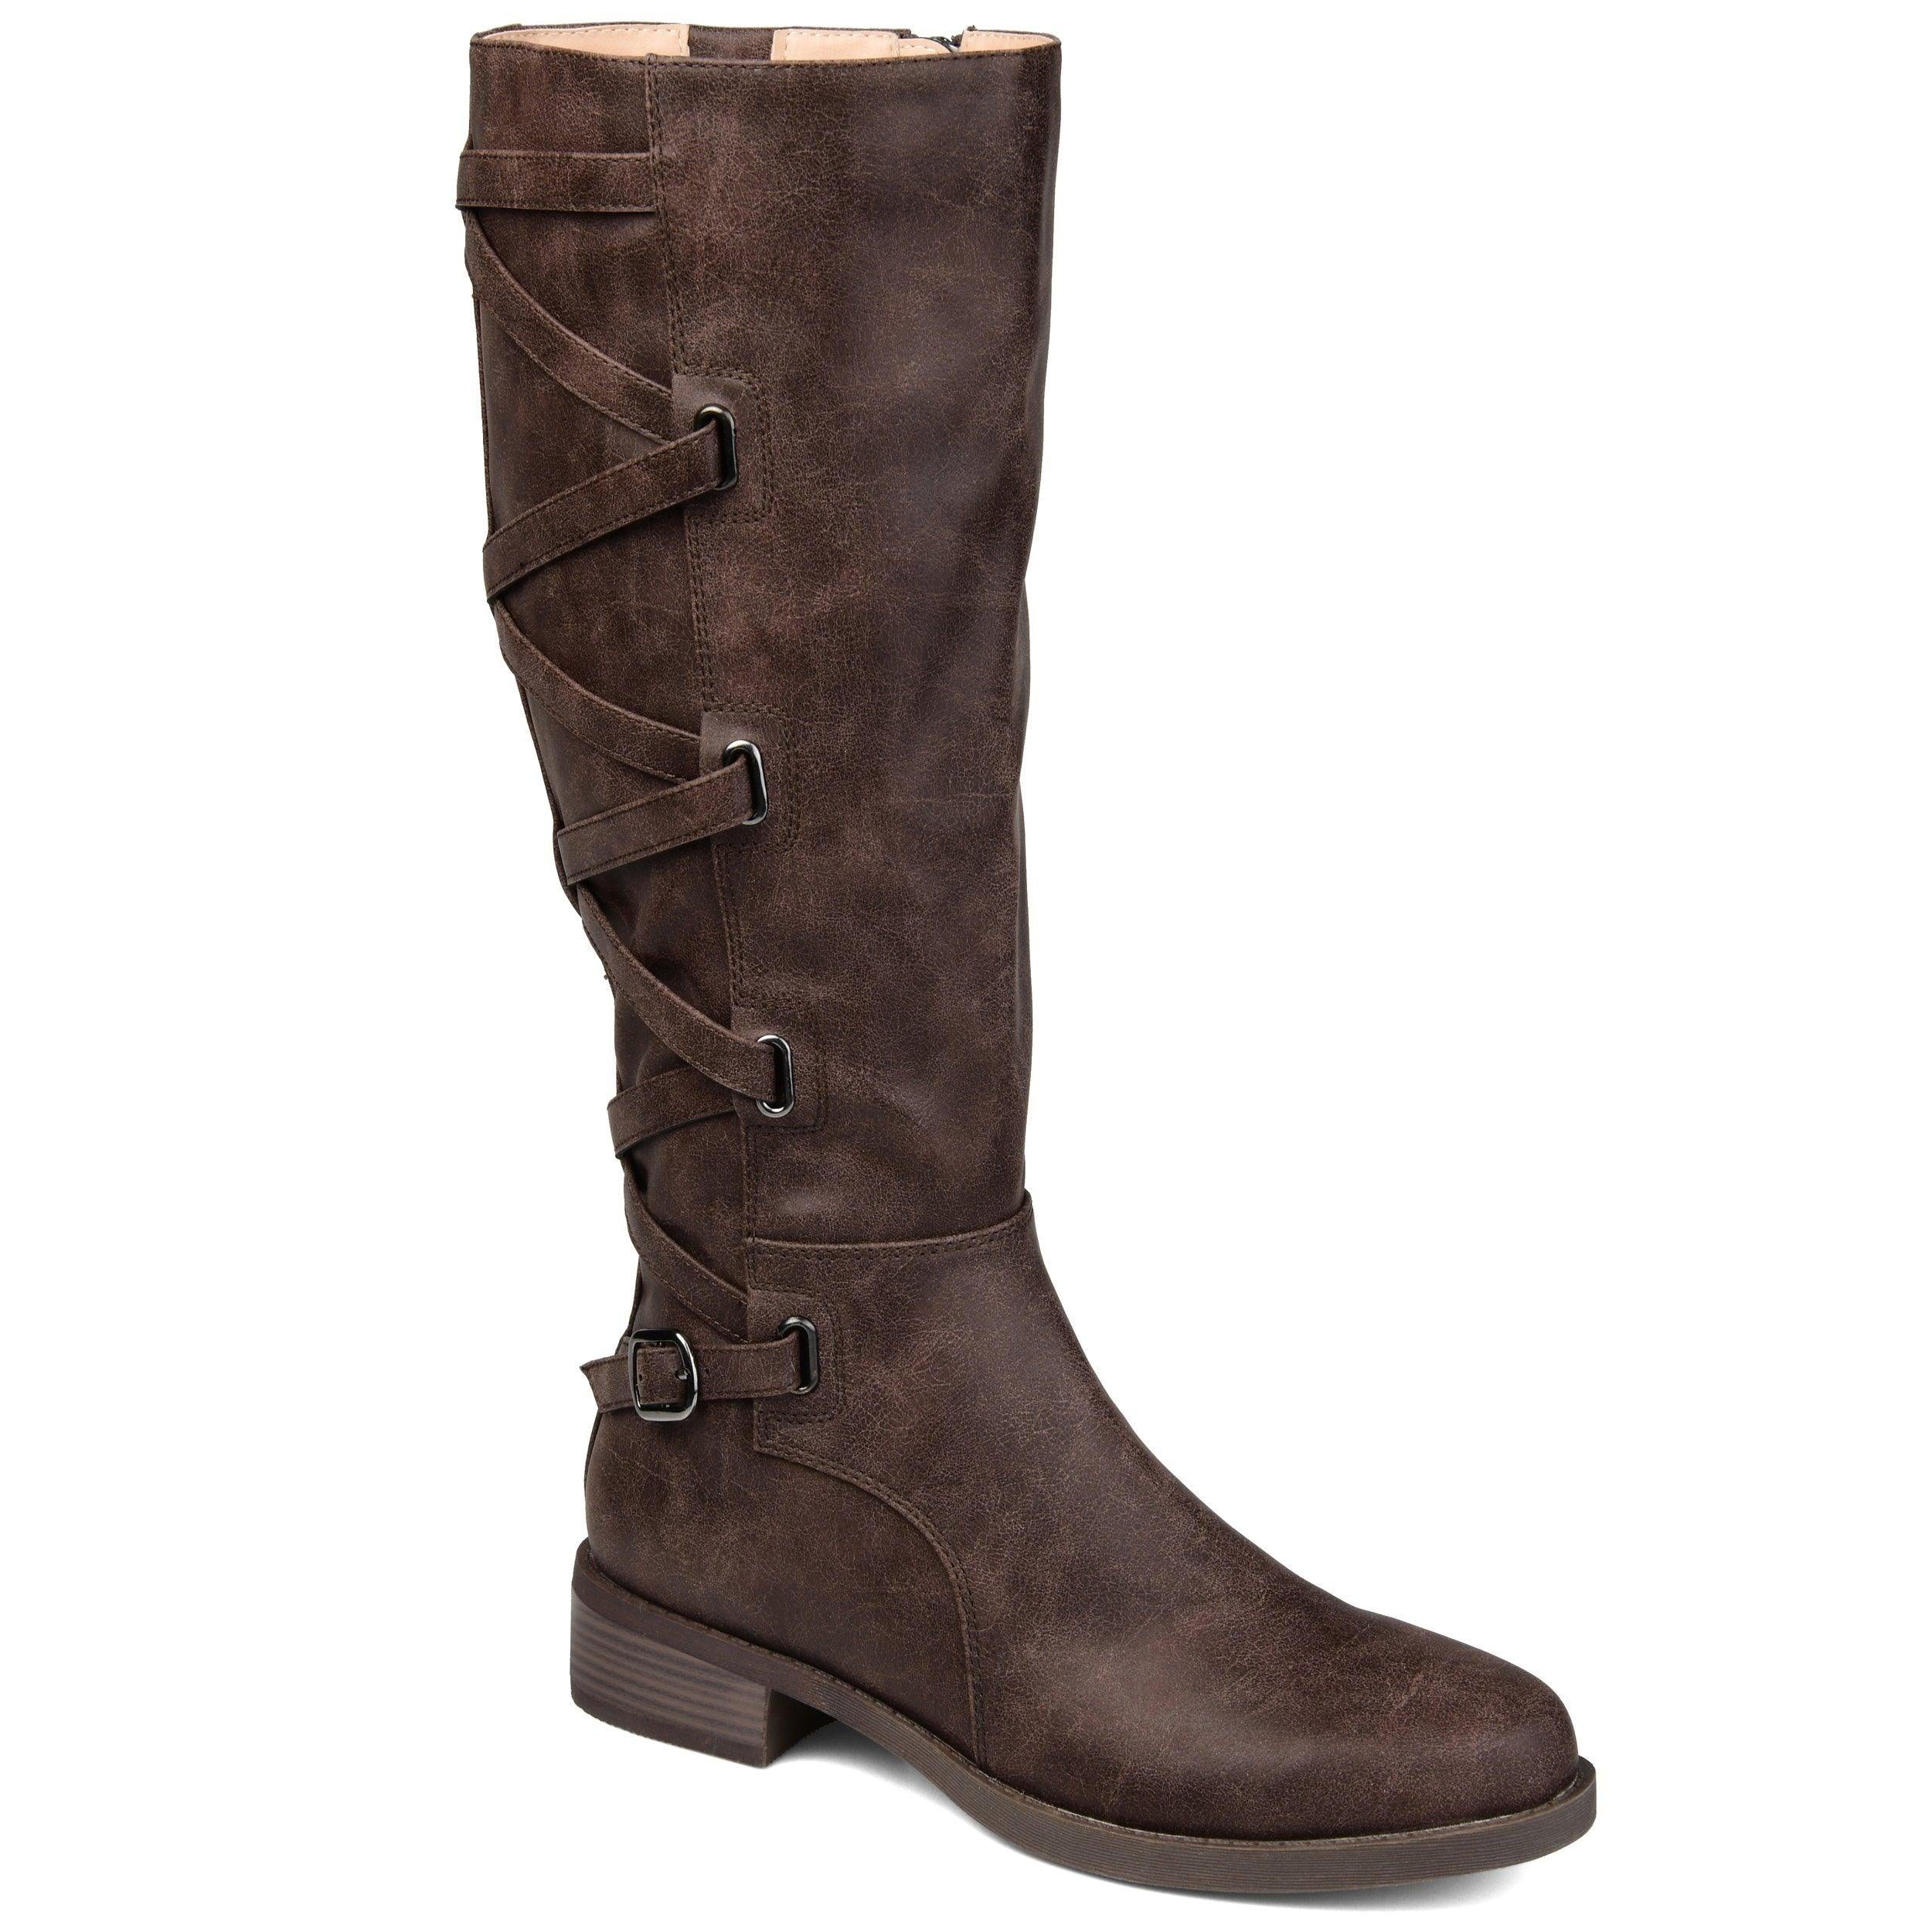 Carly Boot | Women's Buckled Boot | Journee Collection